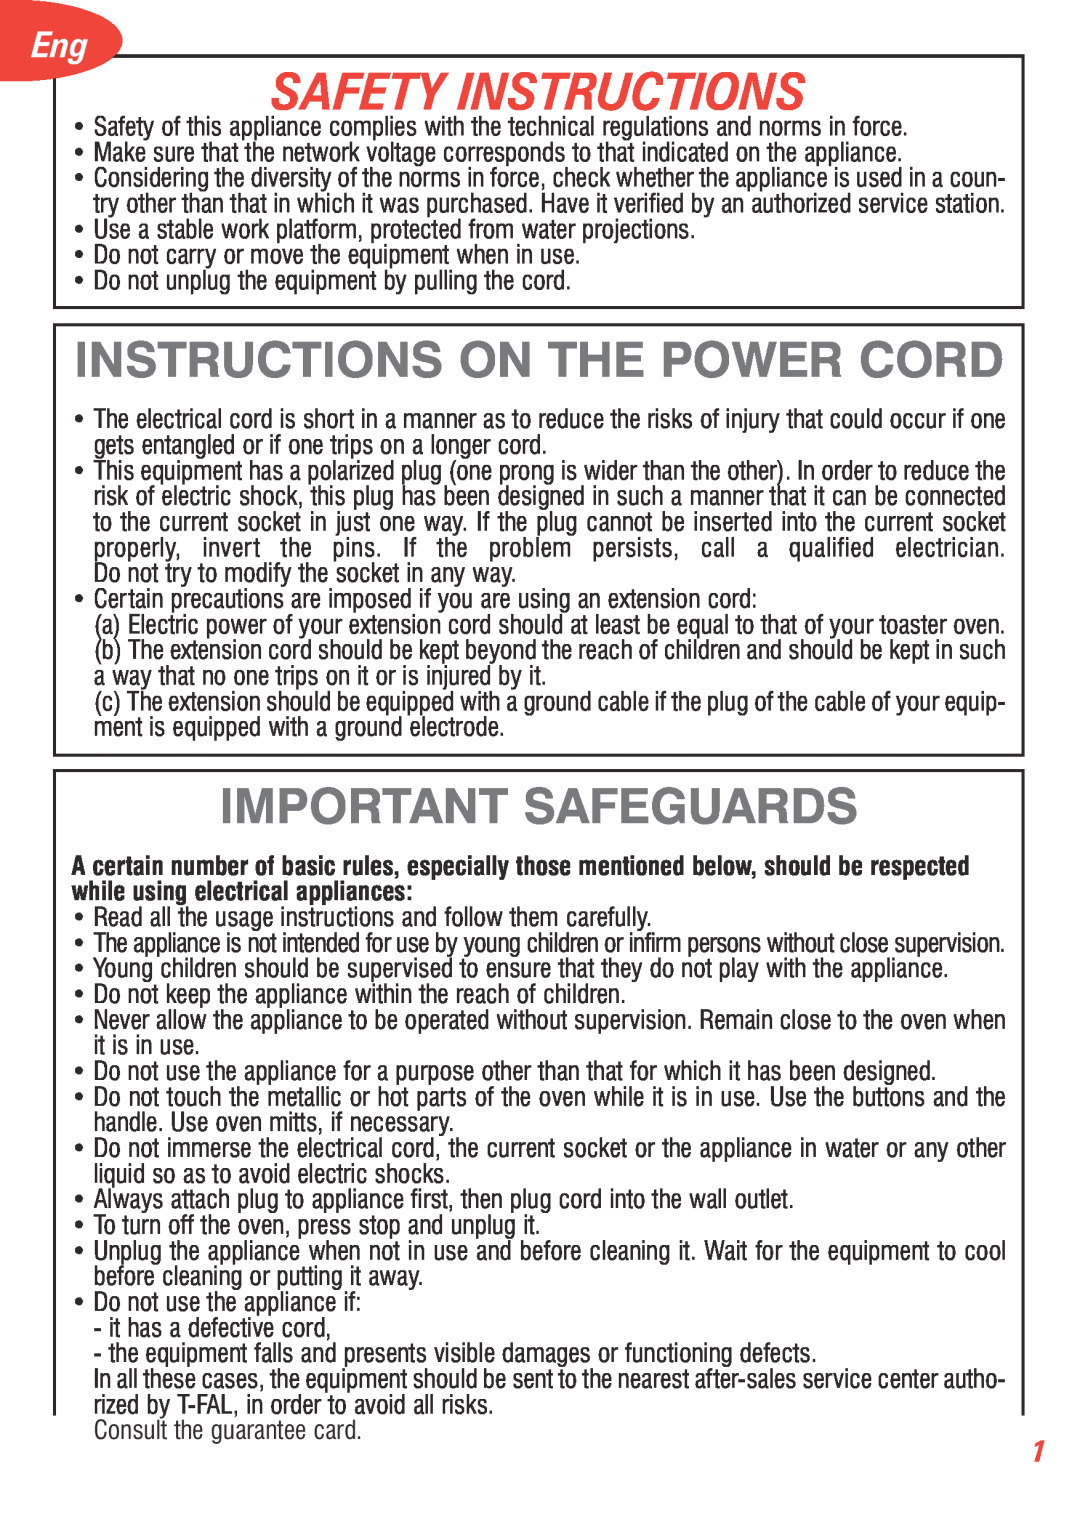 T-Fal 5252 manual Safety Instructions, Instructions On The Power Cord, Important Safeguards 